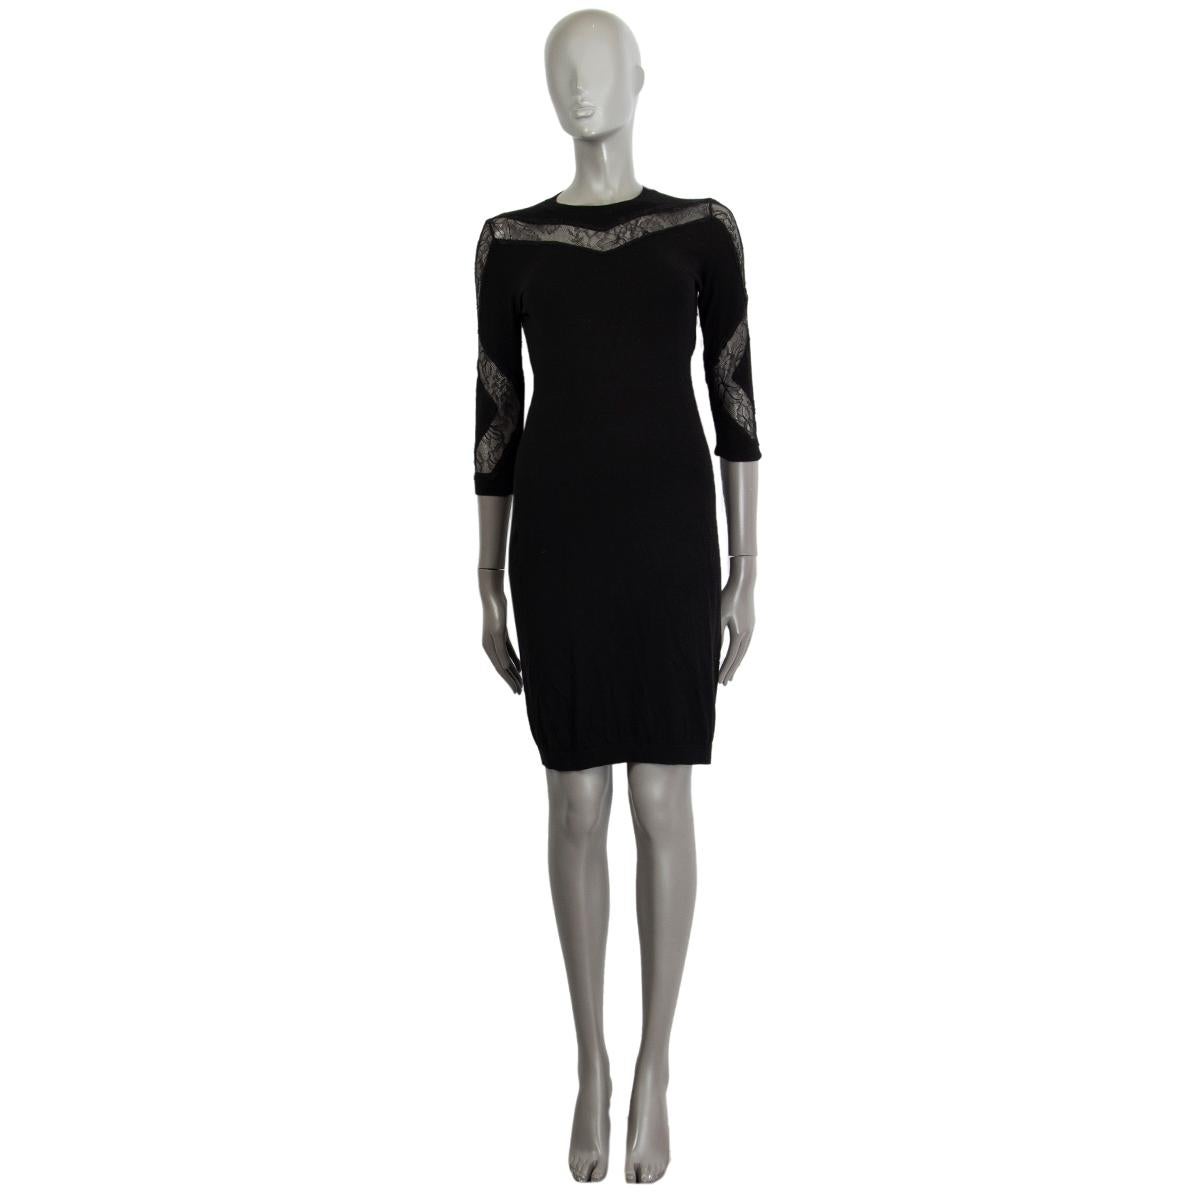 100% authentic Nini Ricci wool-blend dress in black wool (70%) cashmere (30%) with a lace-detail around the chest and along the arms, crew neck, 3/4 arm length, ribbed cuffs and hem. Unlined. Has been worn with some usage signs makes overall a good